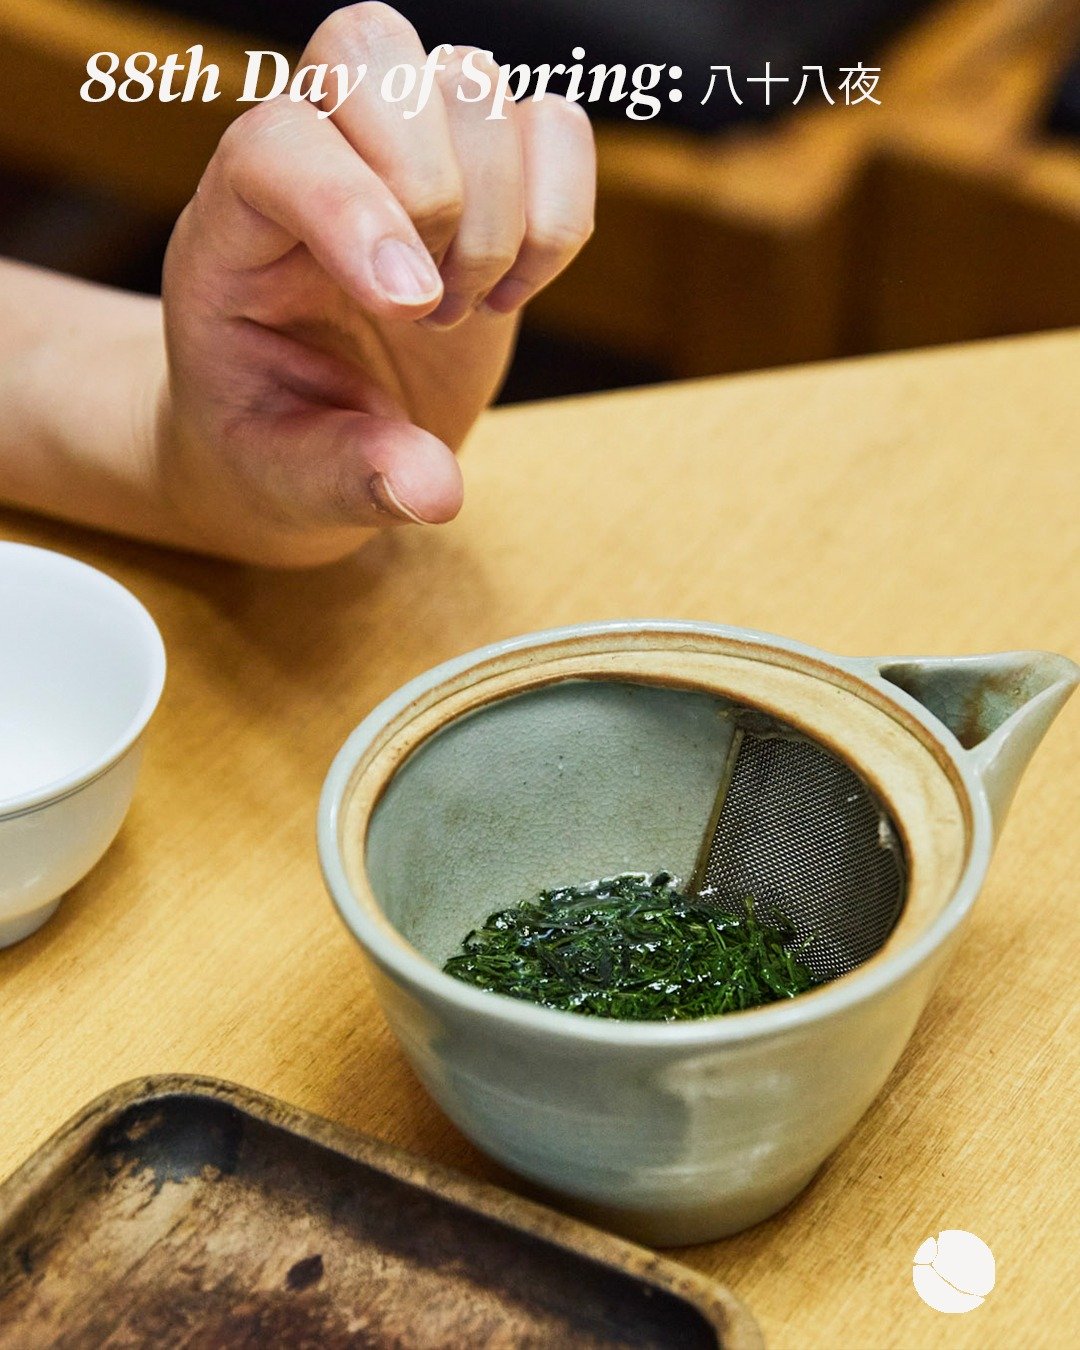 A celebration held on the 88th day of spring according to the Lunar Calendar, the aptly named holiday &quot;hachiju-hachi-ya&quot; is said to be the optimal time to commence tea harvesting season.

The first flush of tea picked during this time is kn